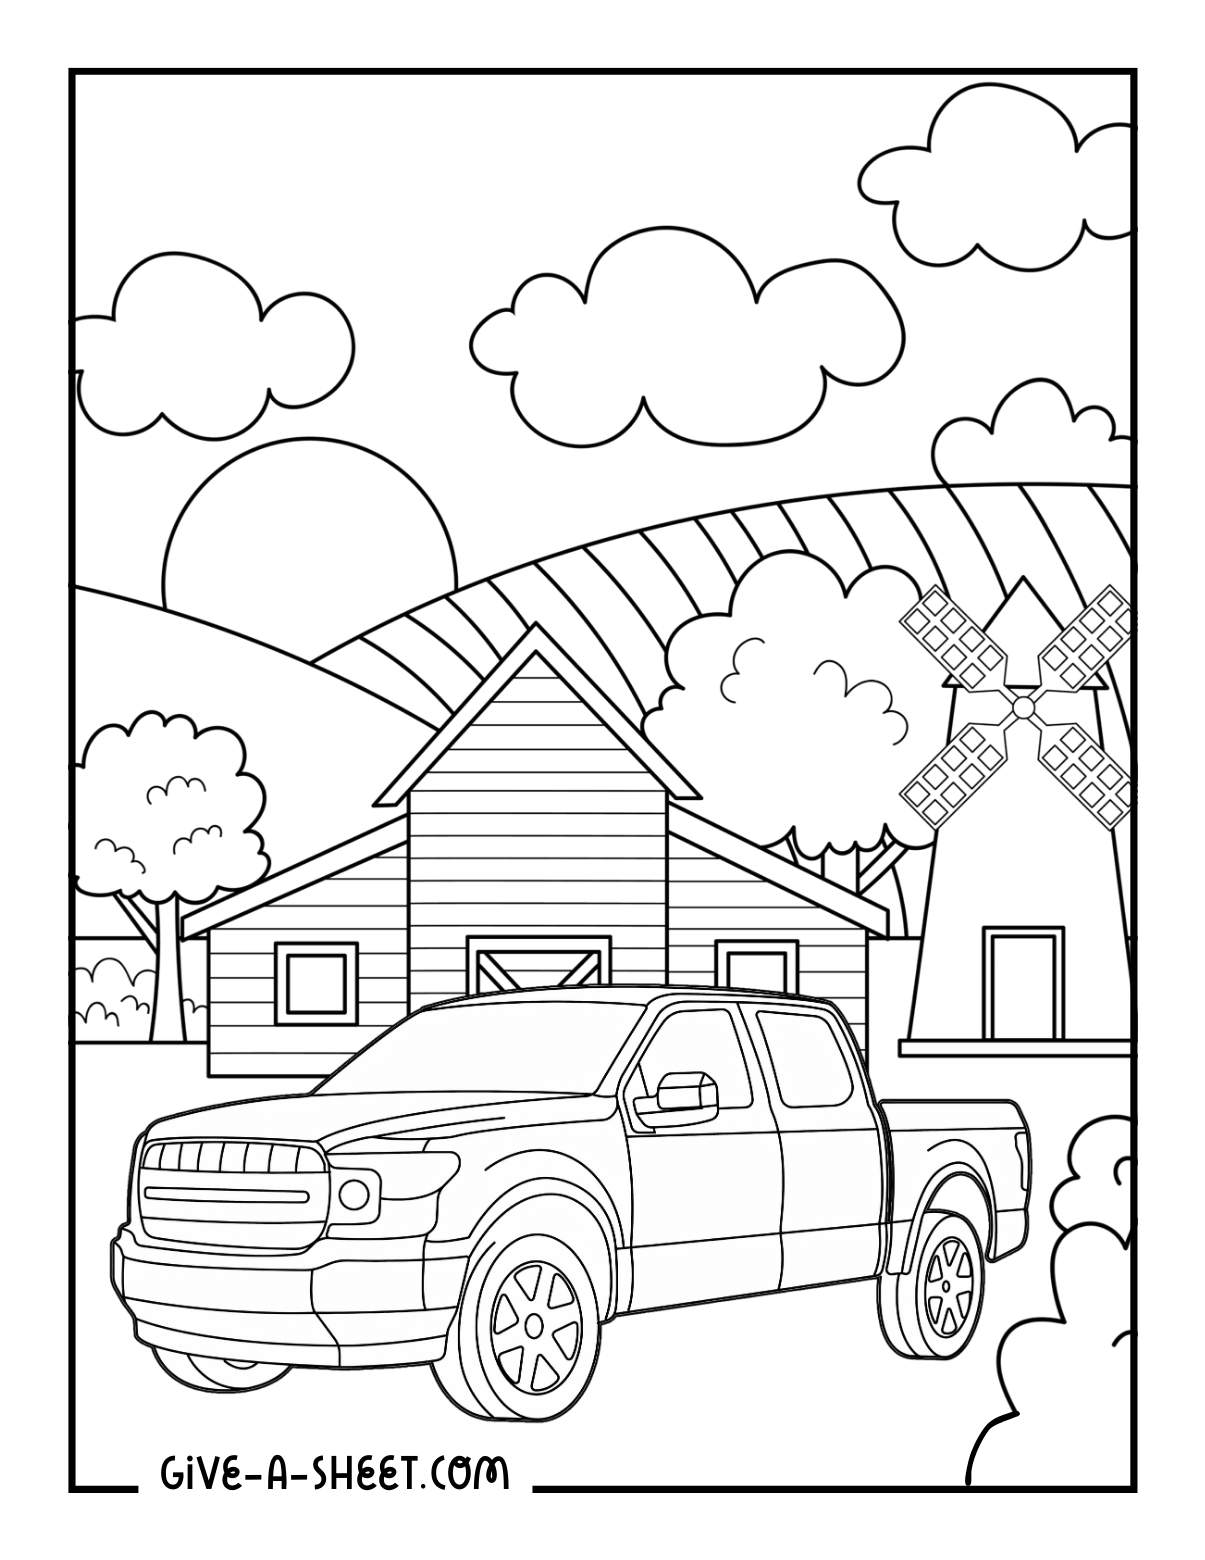 Farm truck coloring page for kids.